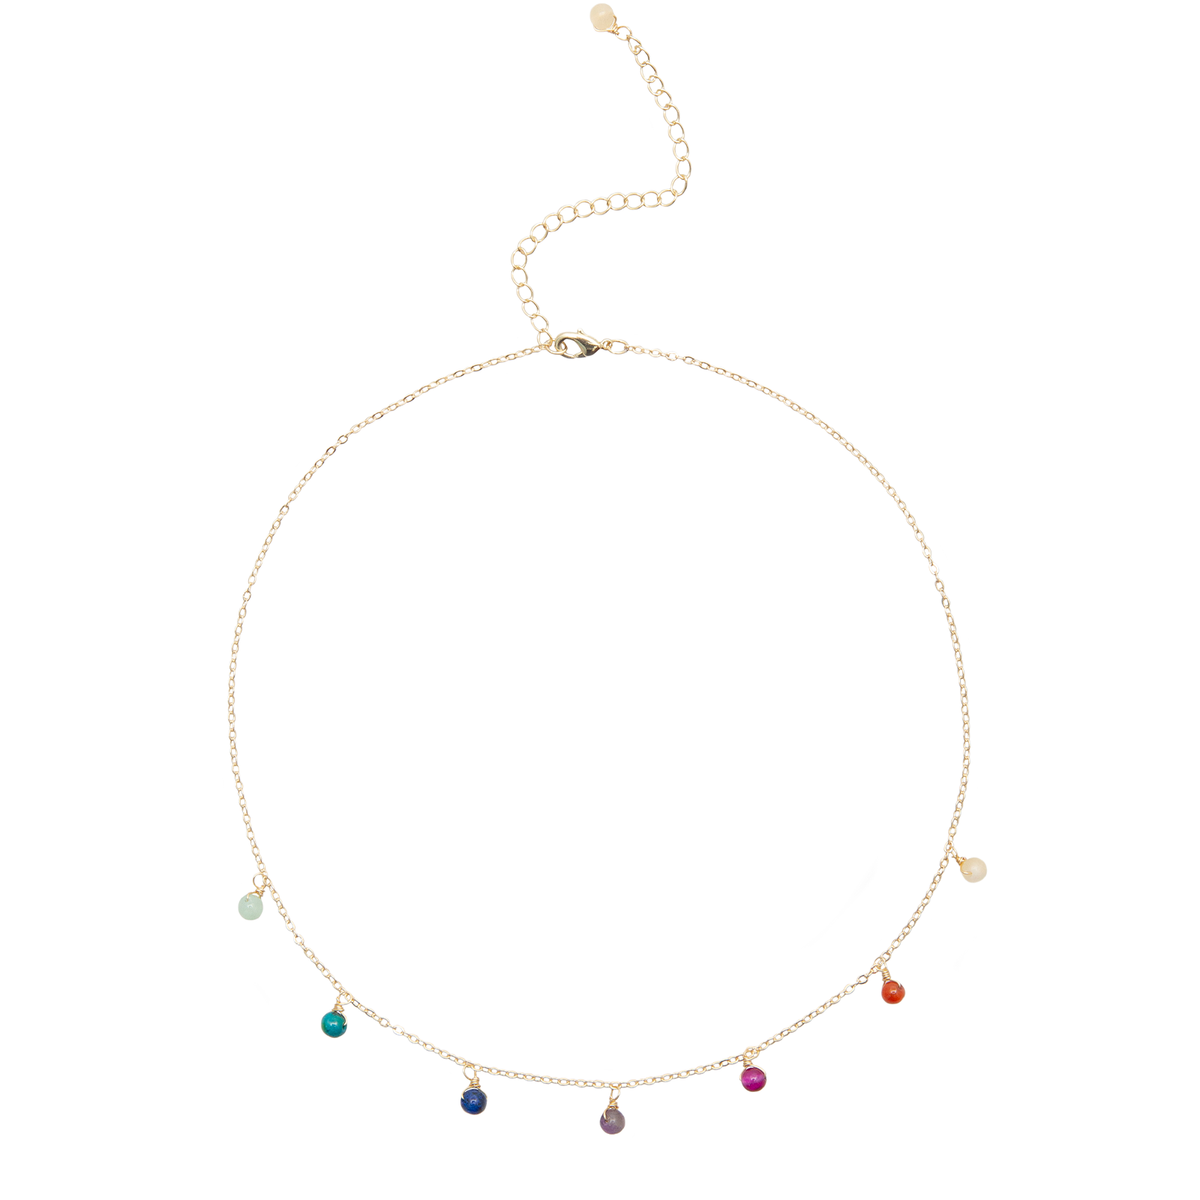 Multicolor stone dewdrop charm healing necklace with gold chain